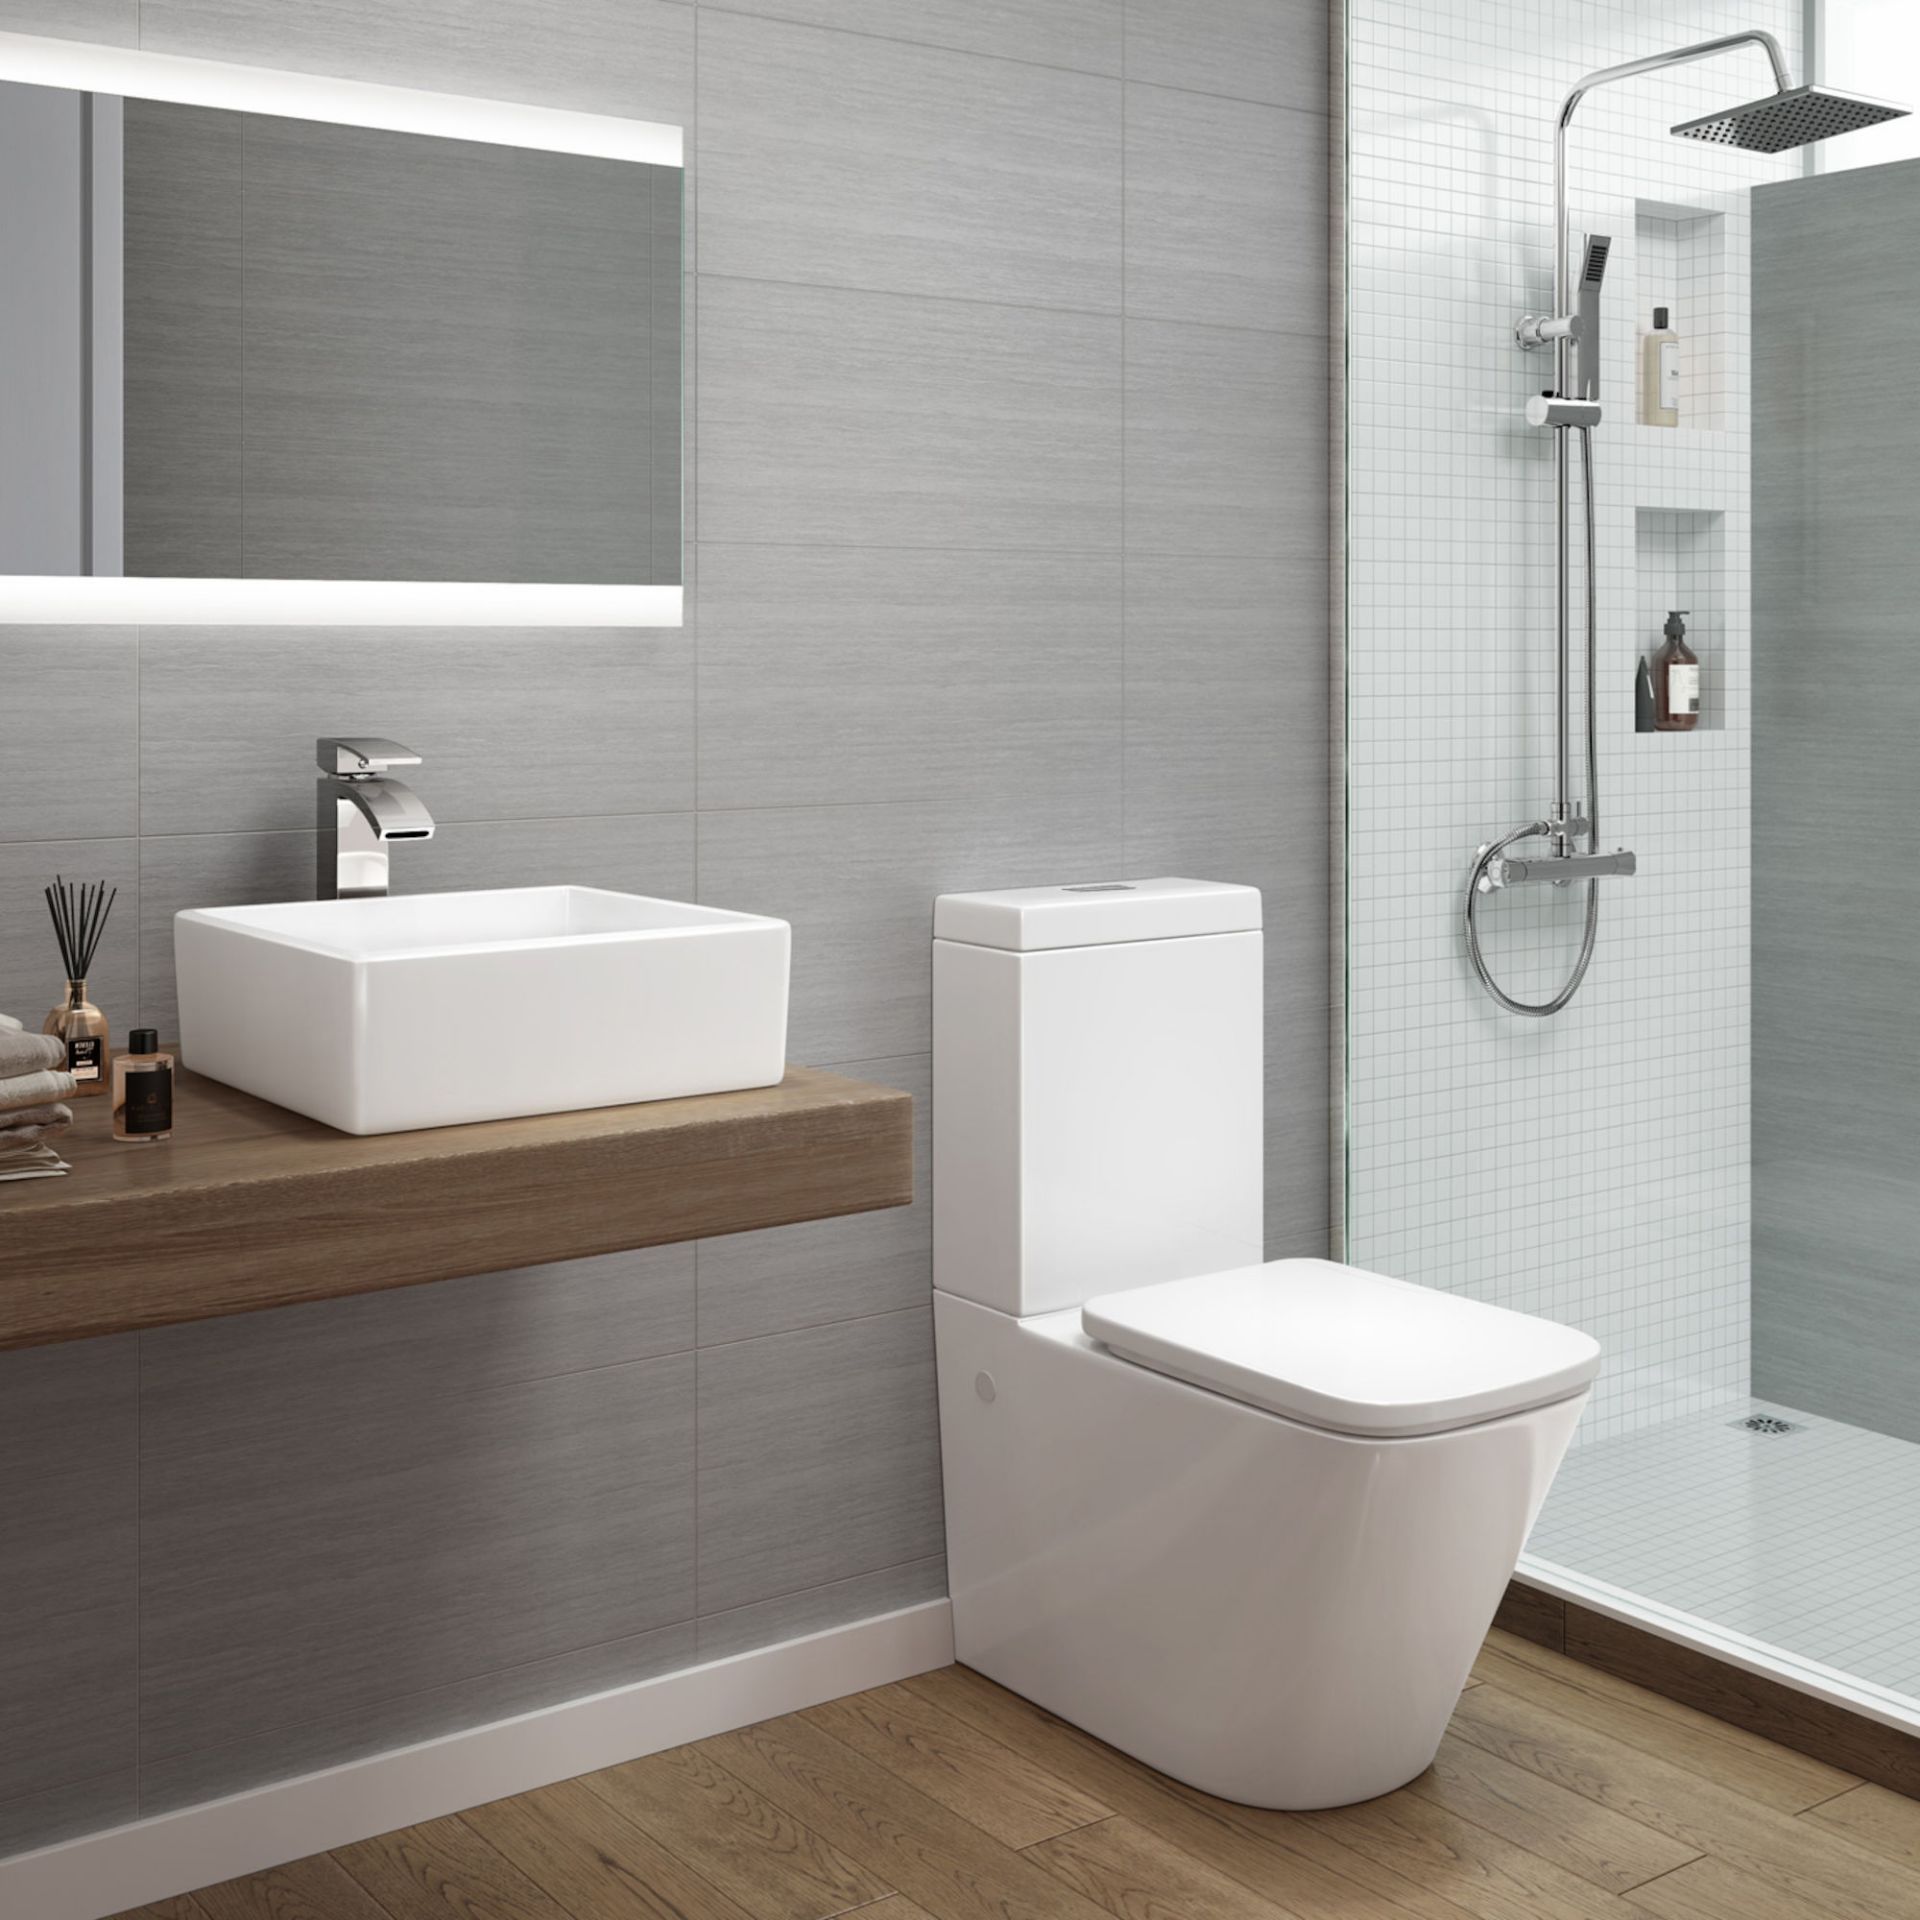 (XM83) Florence Close Coupled Toilet & Cistern inc Soft Close Seat Contemporary design finished in a - Image 4 of 4